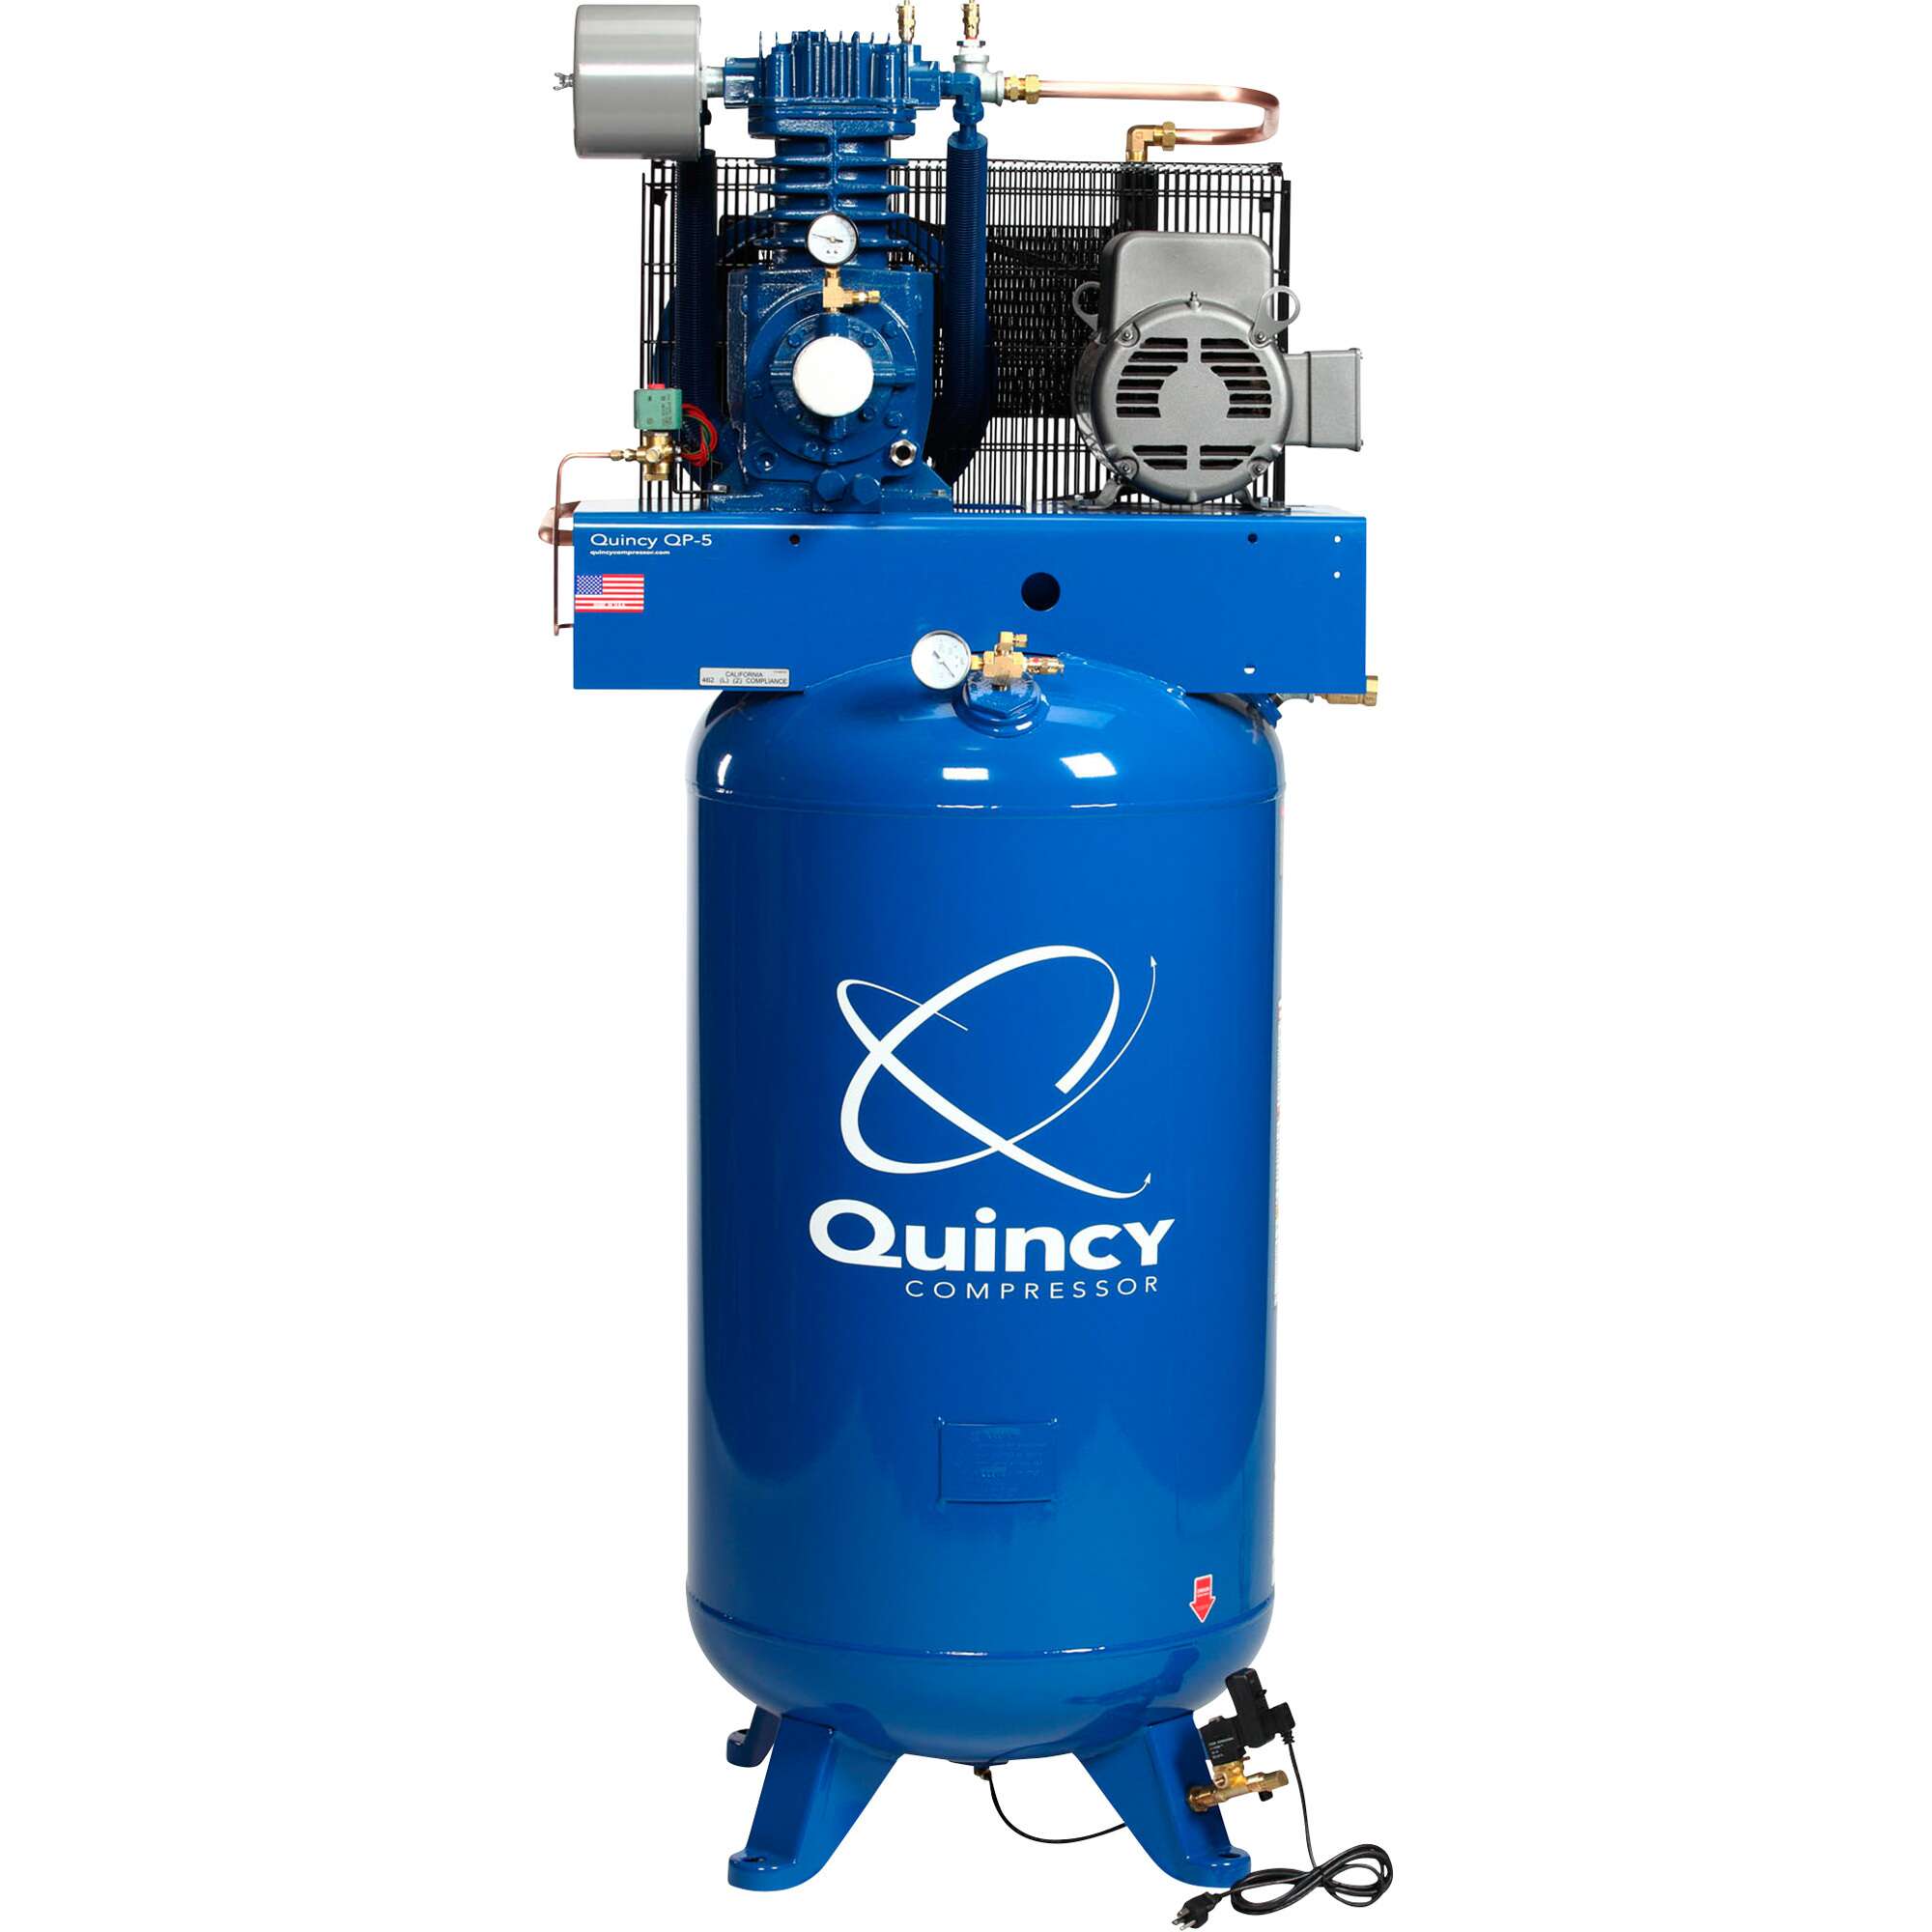 Quincy QP5 Pressure Lubricated Air Compressor with MAX Package 5 HP 230 Volt 1 Phase 80 Gallon Vertical